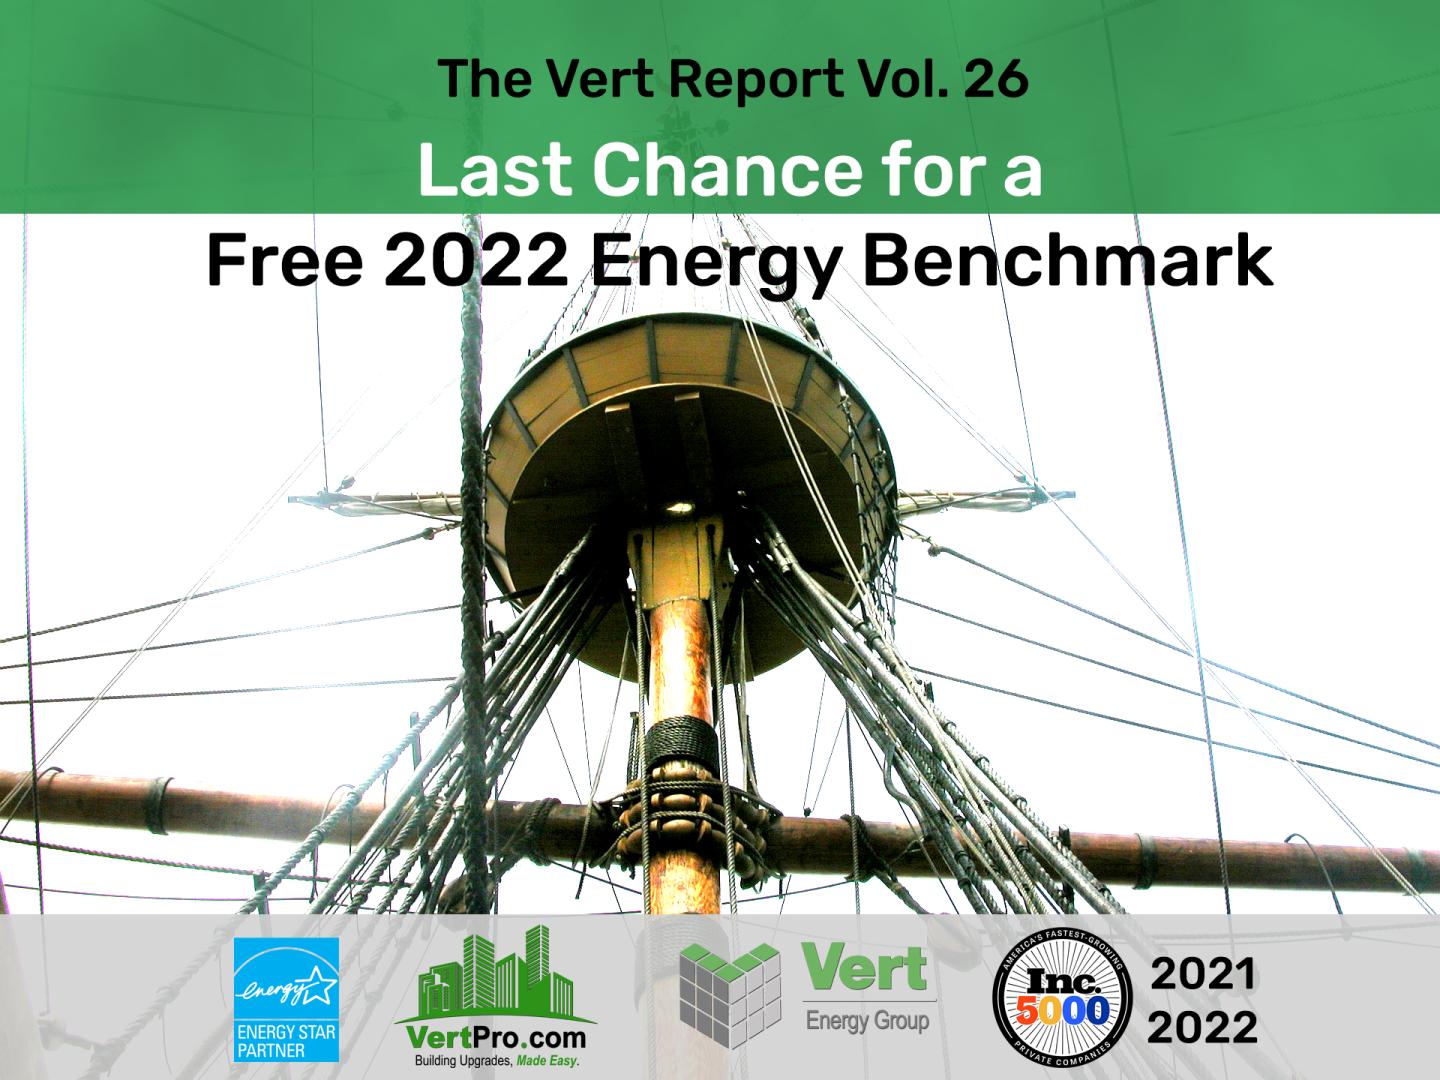 Offering a Free 2022 Energy Benchmark